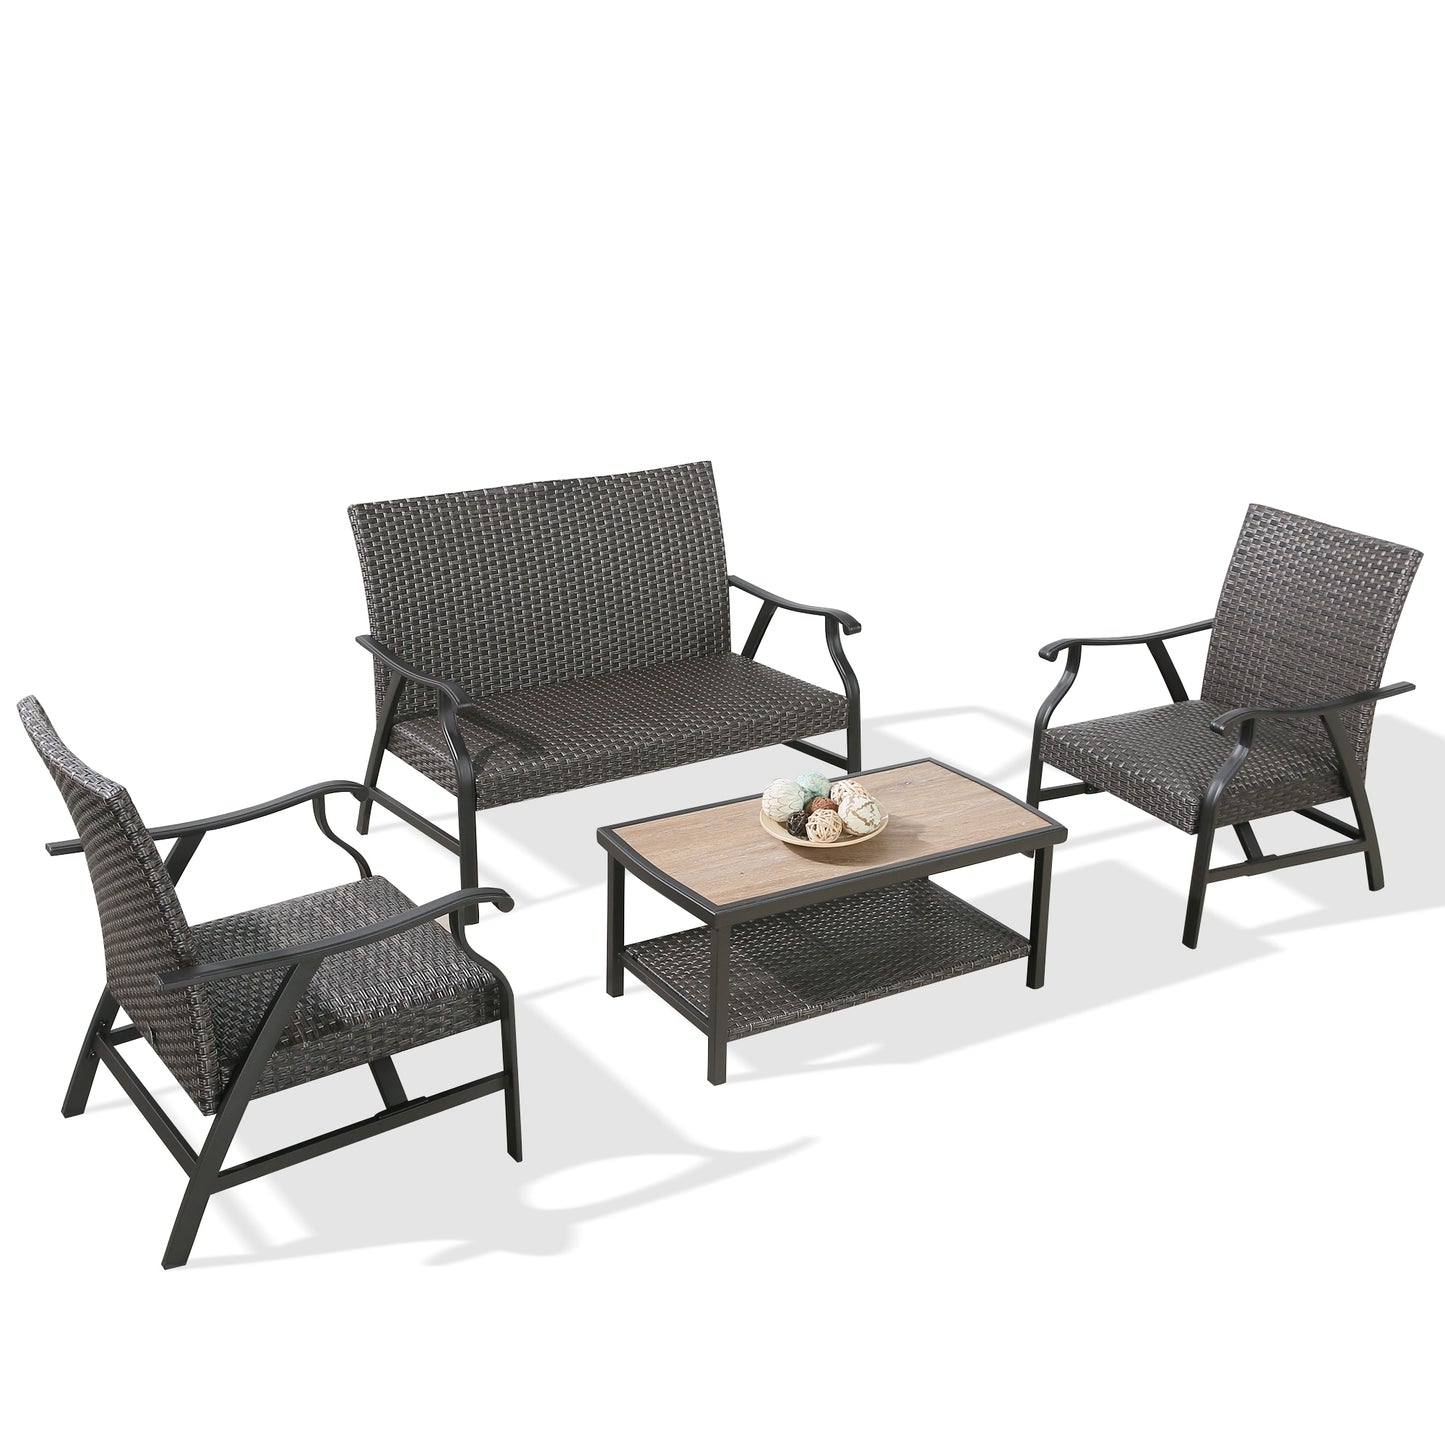 4-Piece Indoor Outdoor Wicker Padded Conversation Set Patio Rattan Furniture Set with 2 Motion Rocking Armchairs, 1 Loveseat and 1 Alucobond Coffee Table for 4 Persons